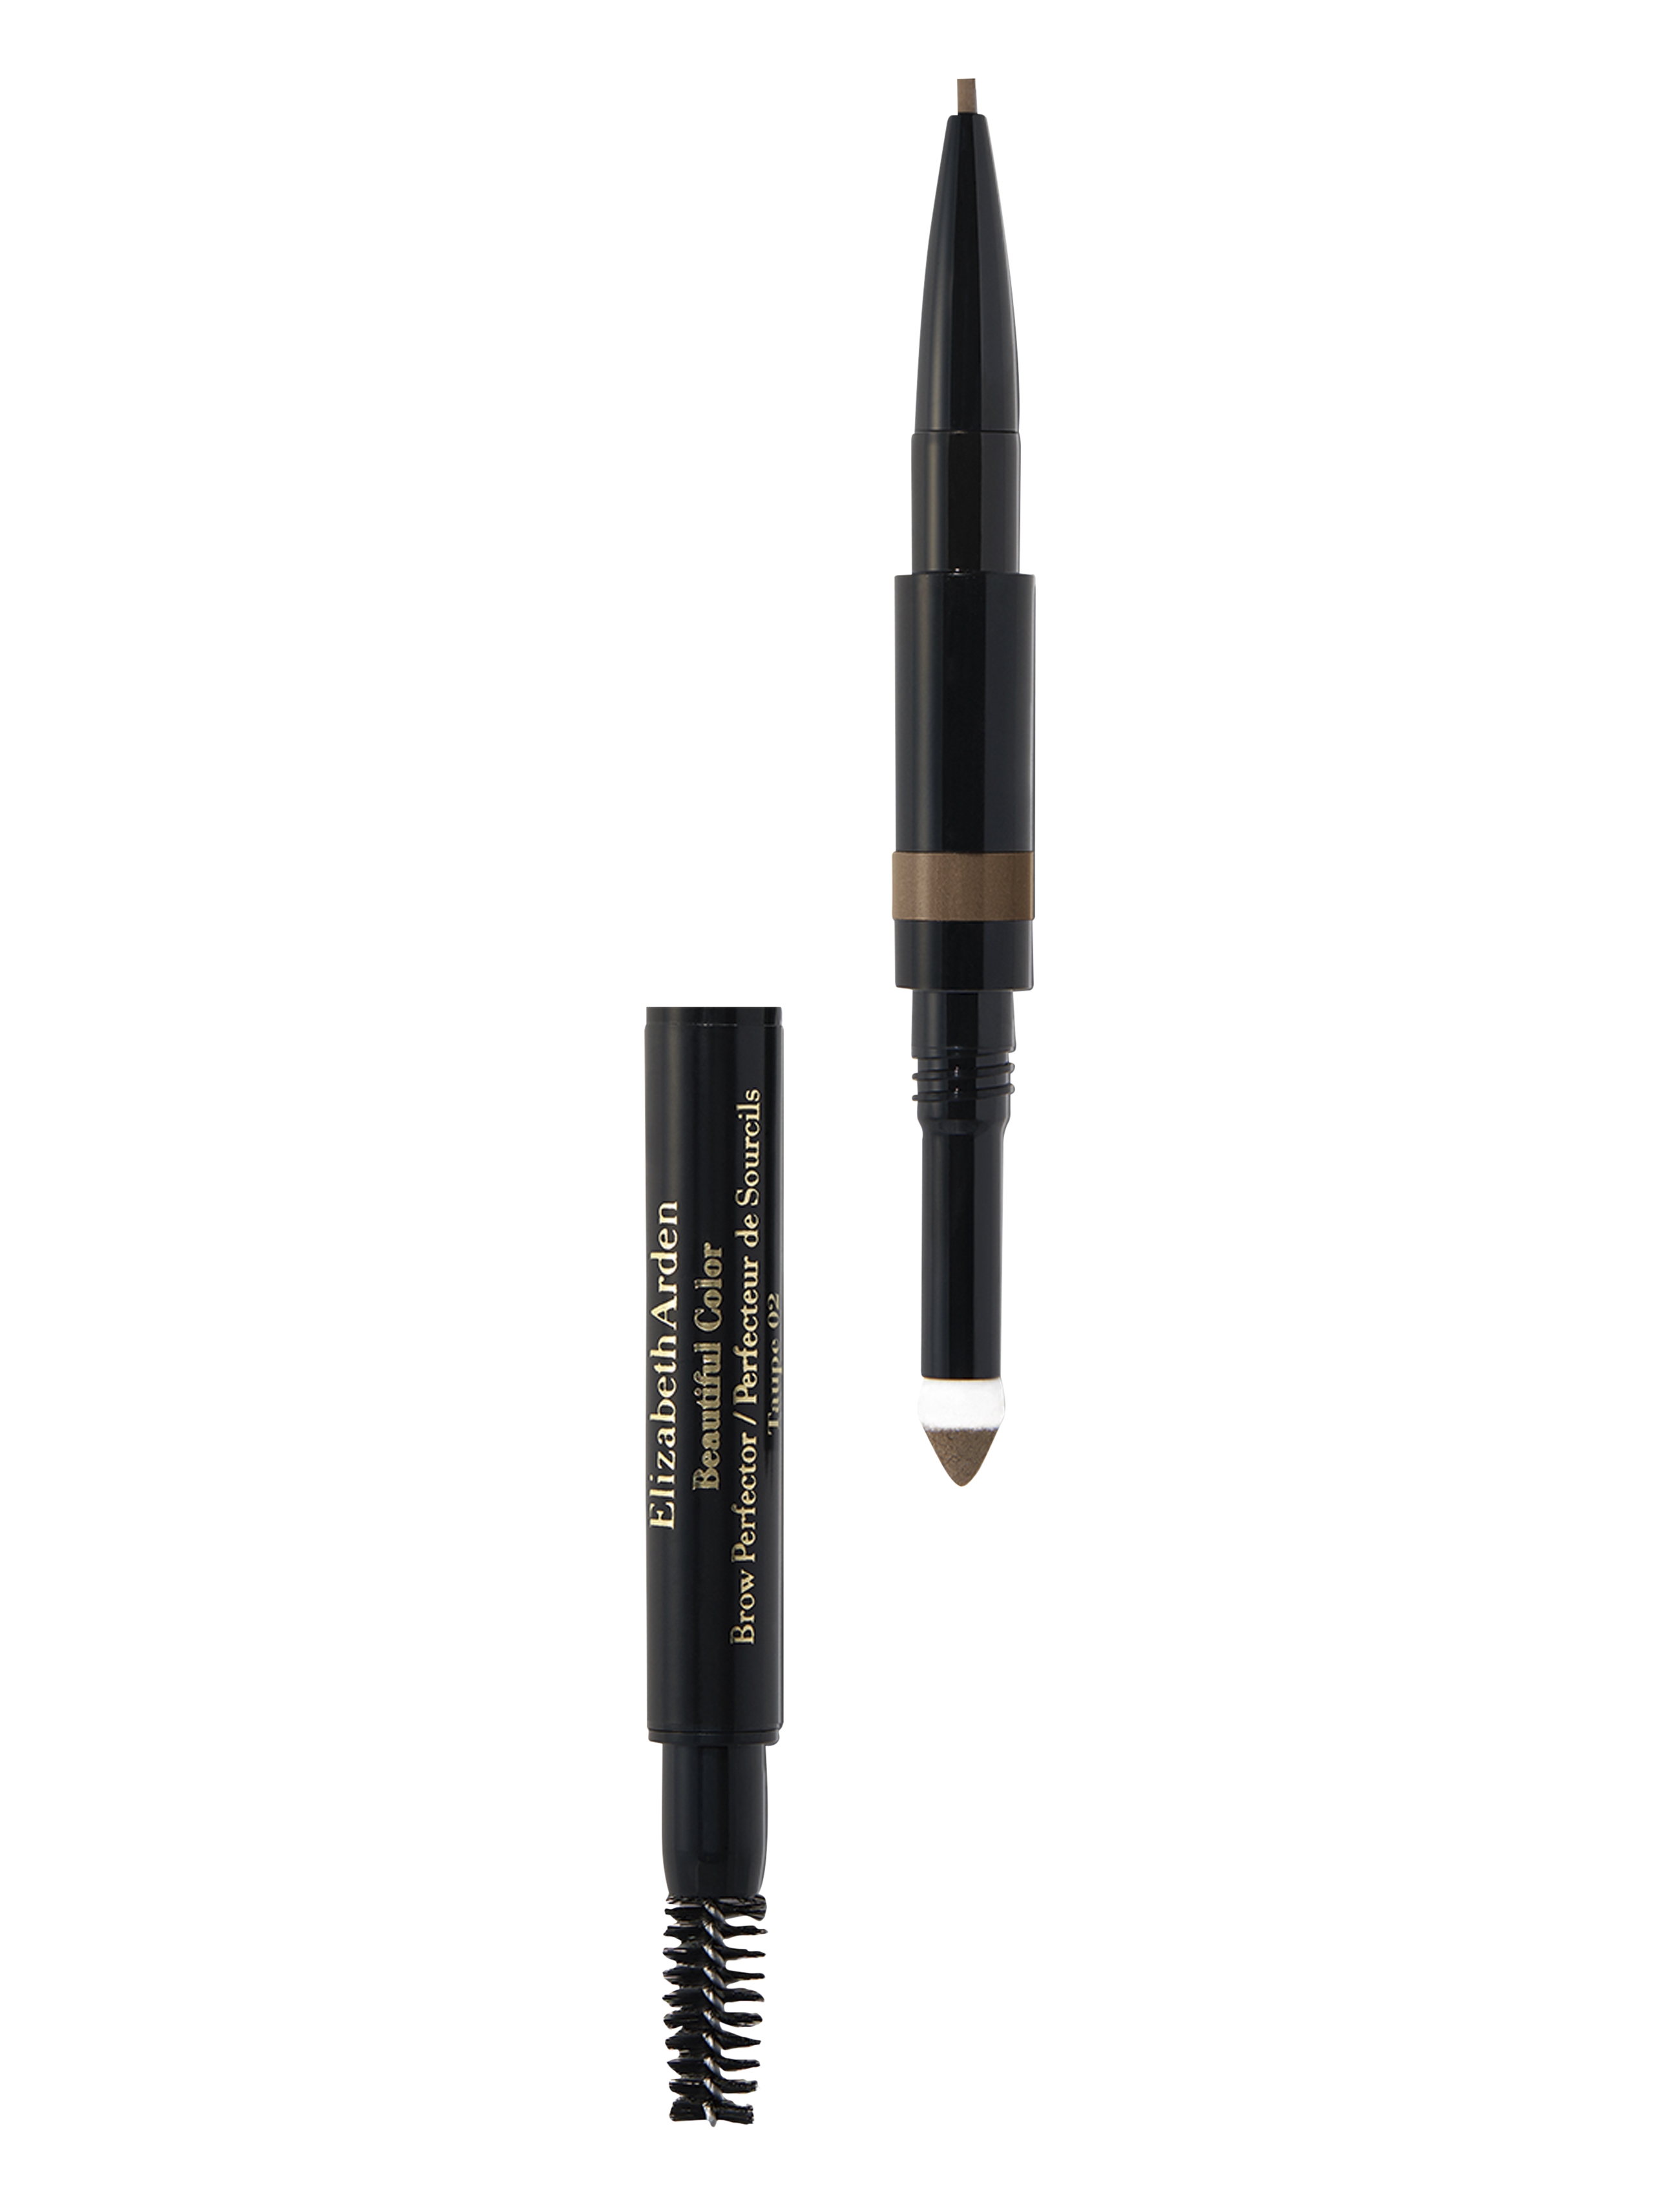  Brow Perfector 3-In-1